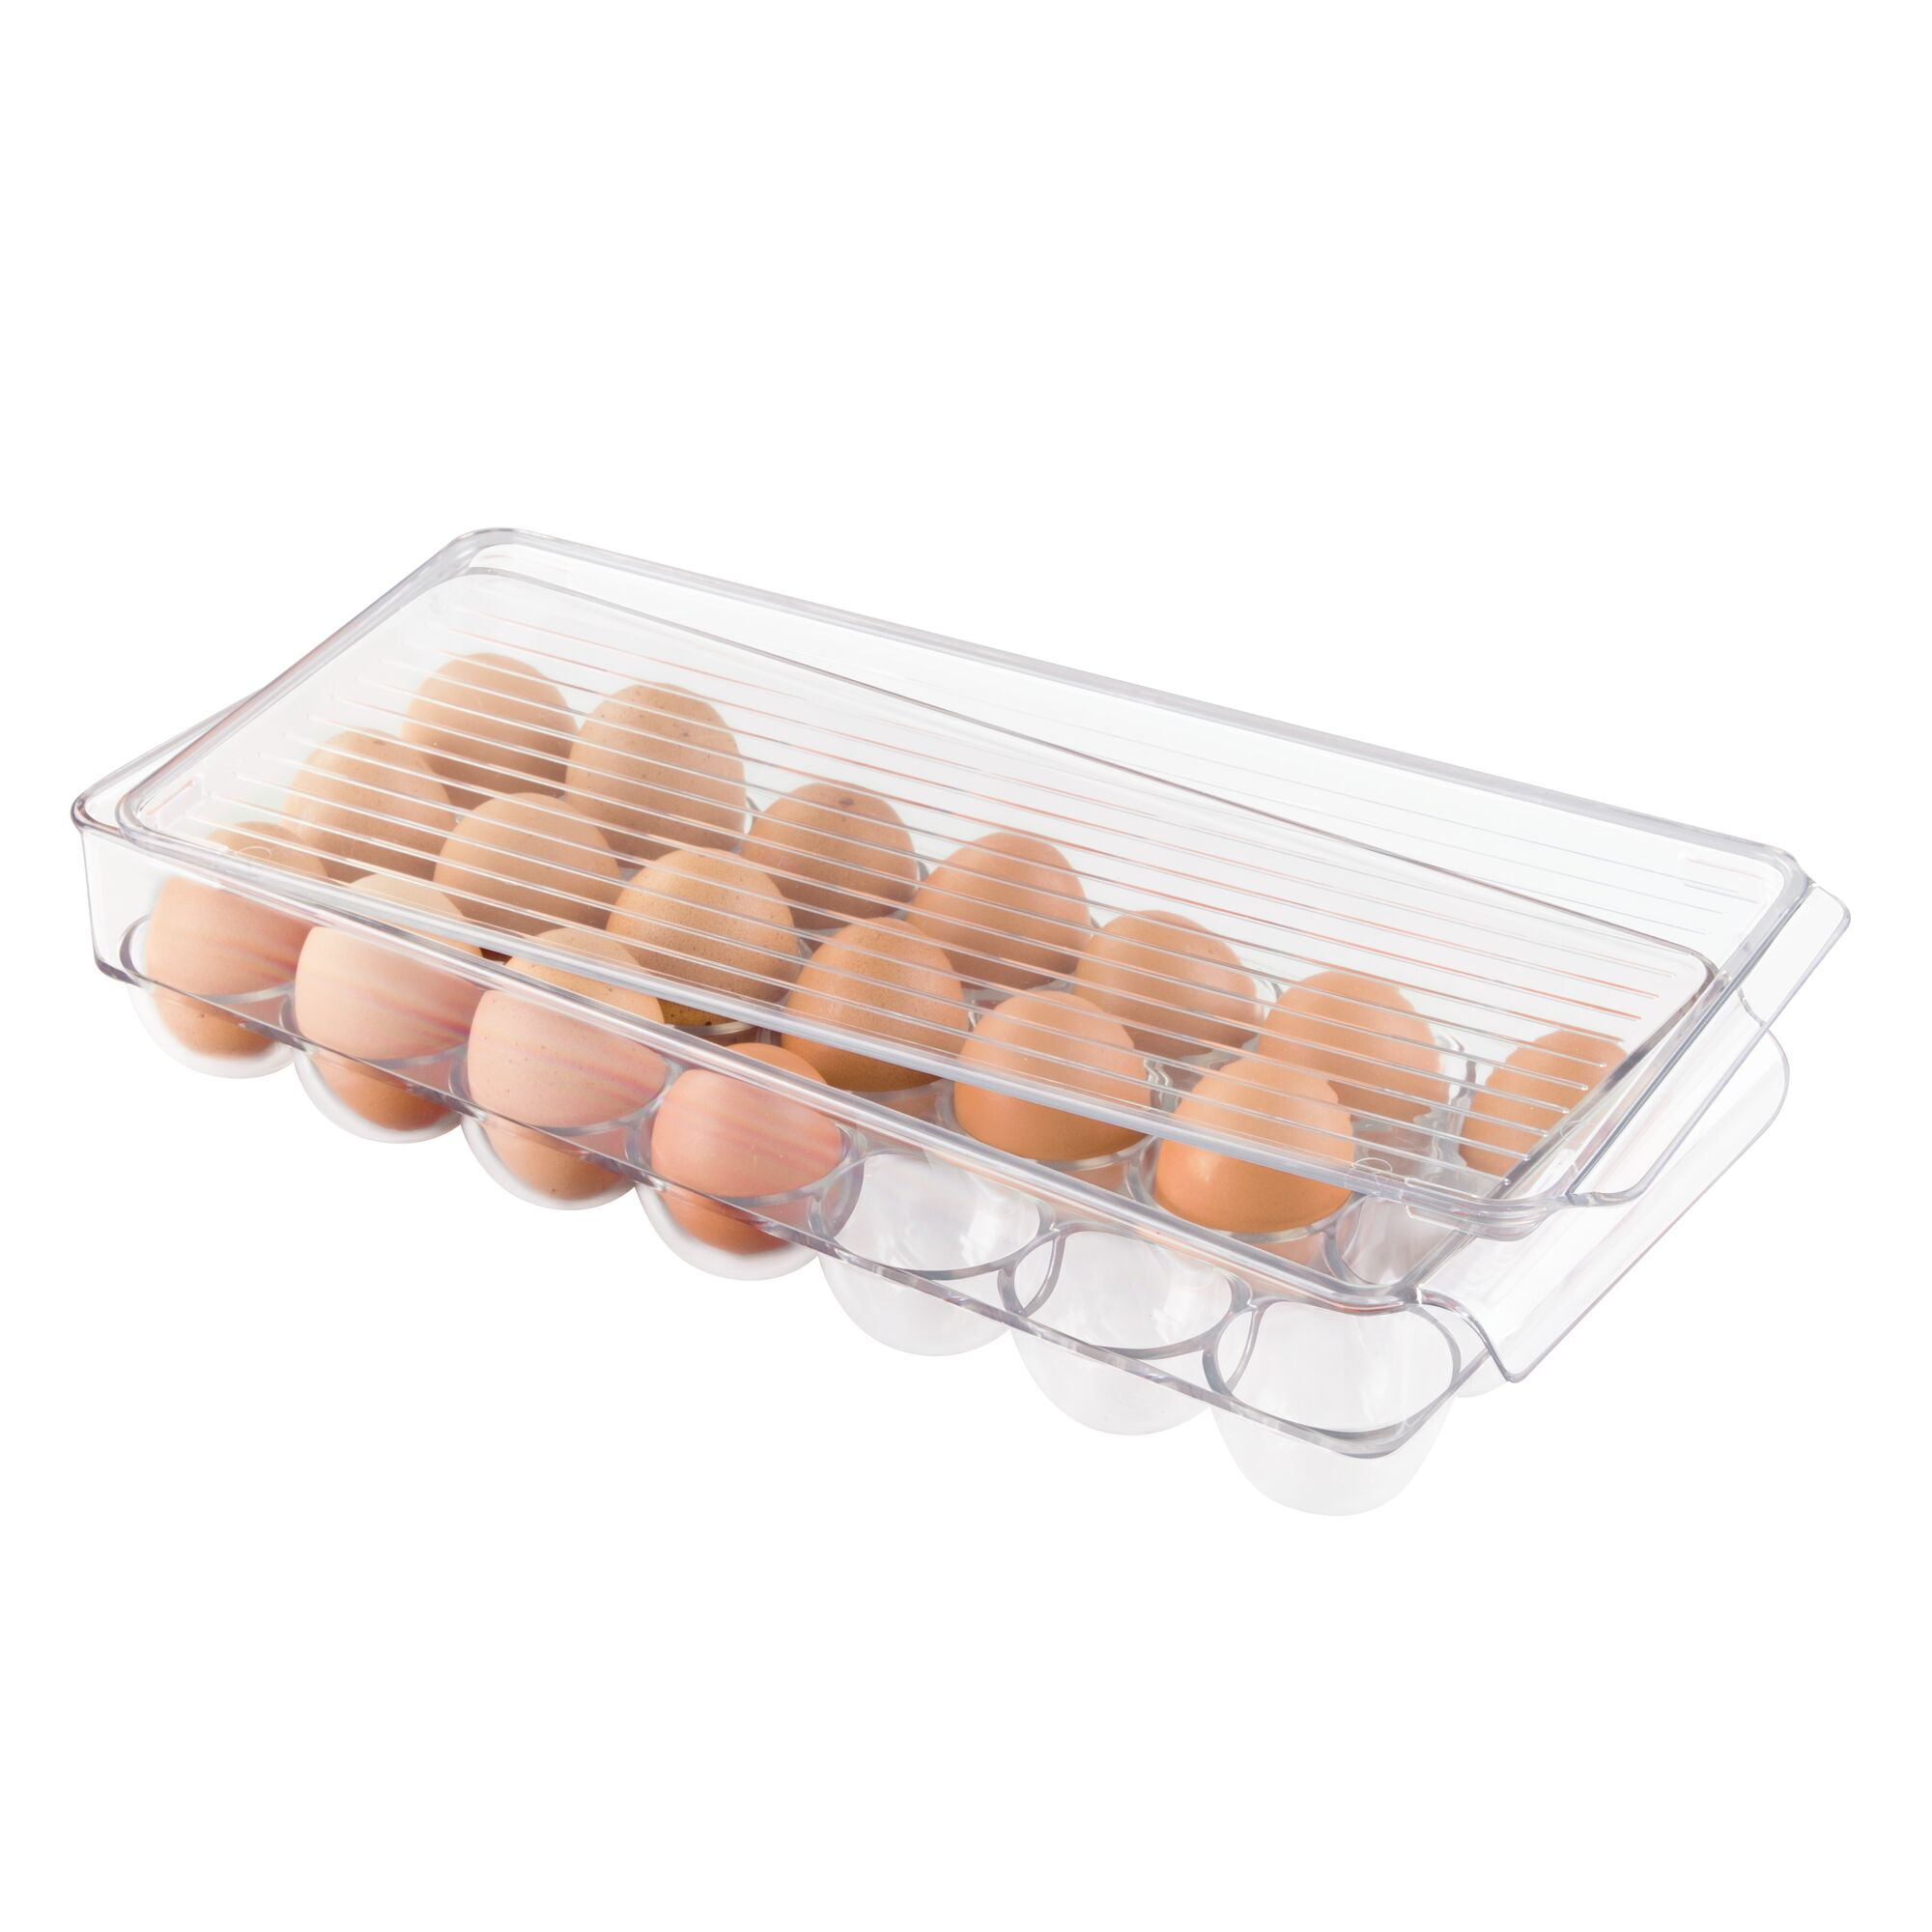 ZHAIXIAONIAN Egg Holder for Refrigerator, 60 Egg Drawer Organizer with Time  Scale, Stackable Egg Holder Egg Trays, Clear Egg Fresh Storage Box for